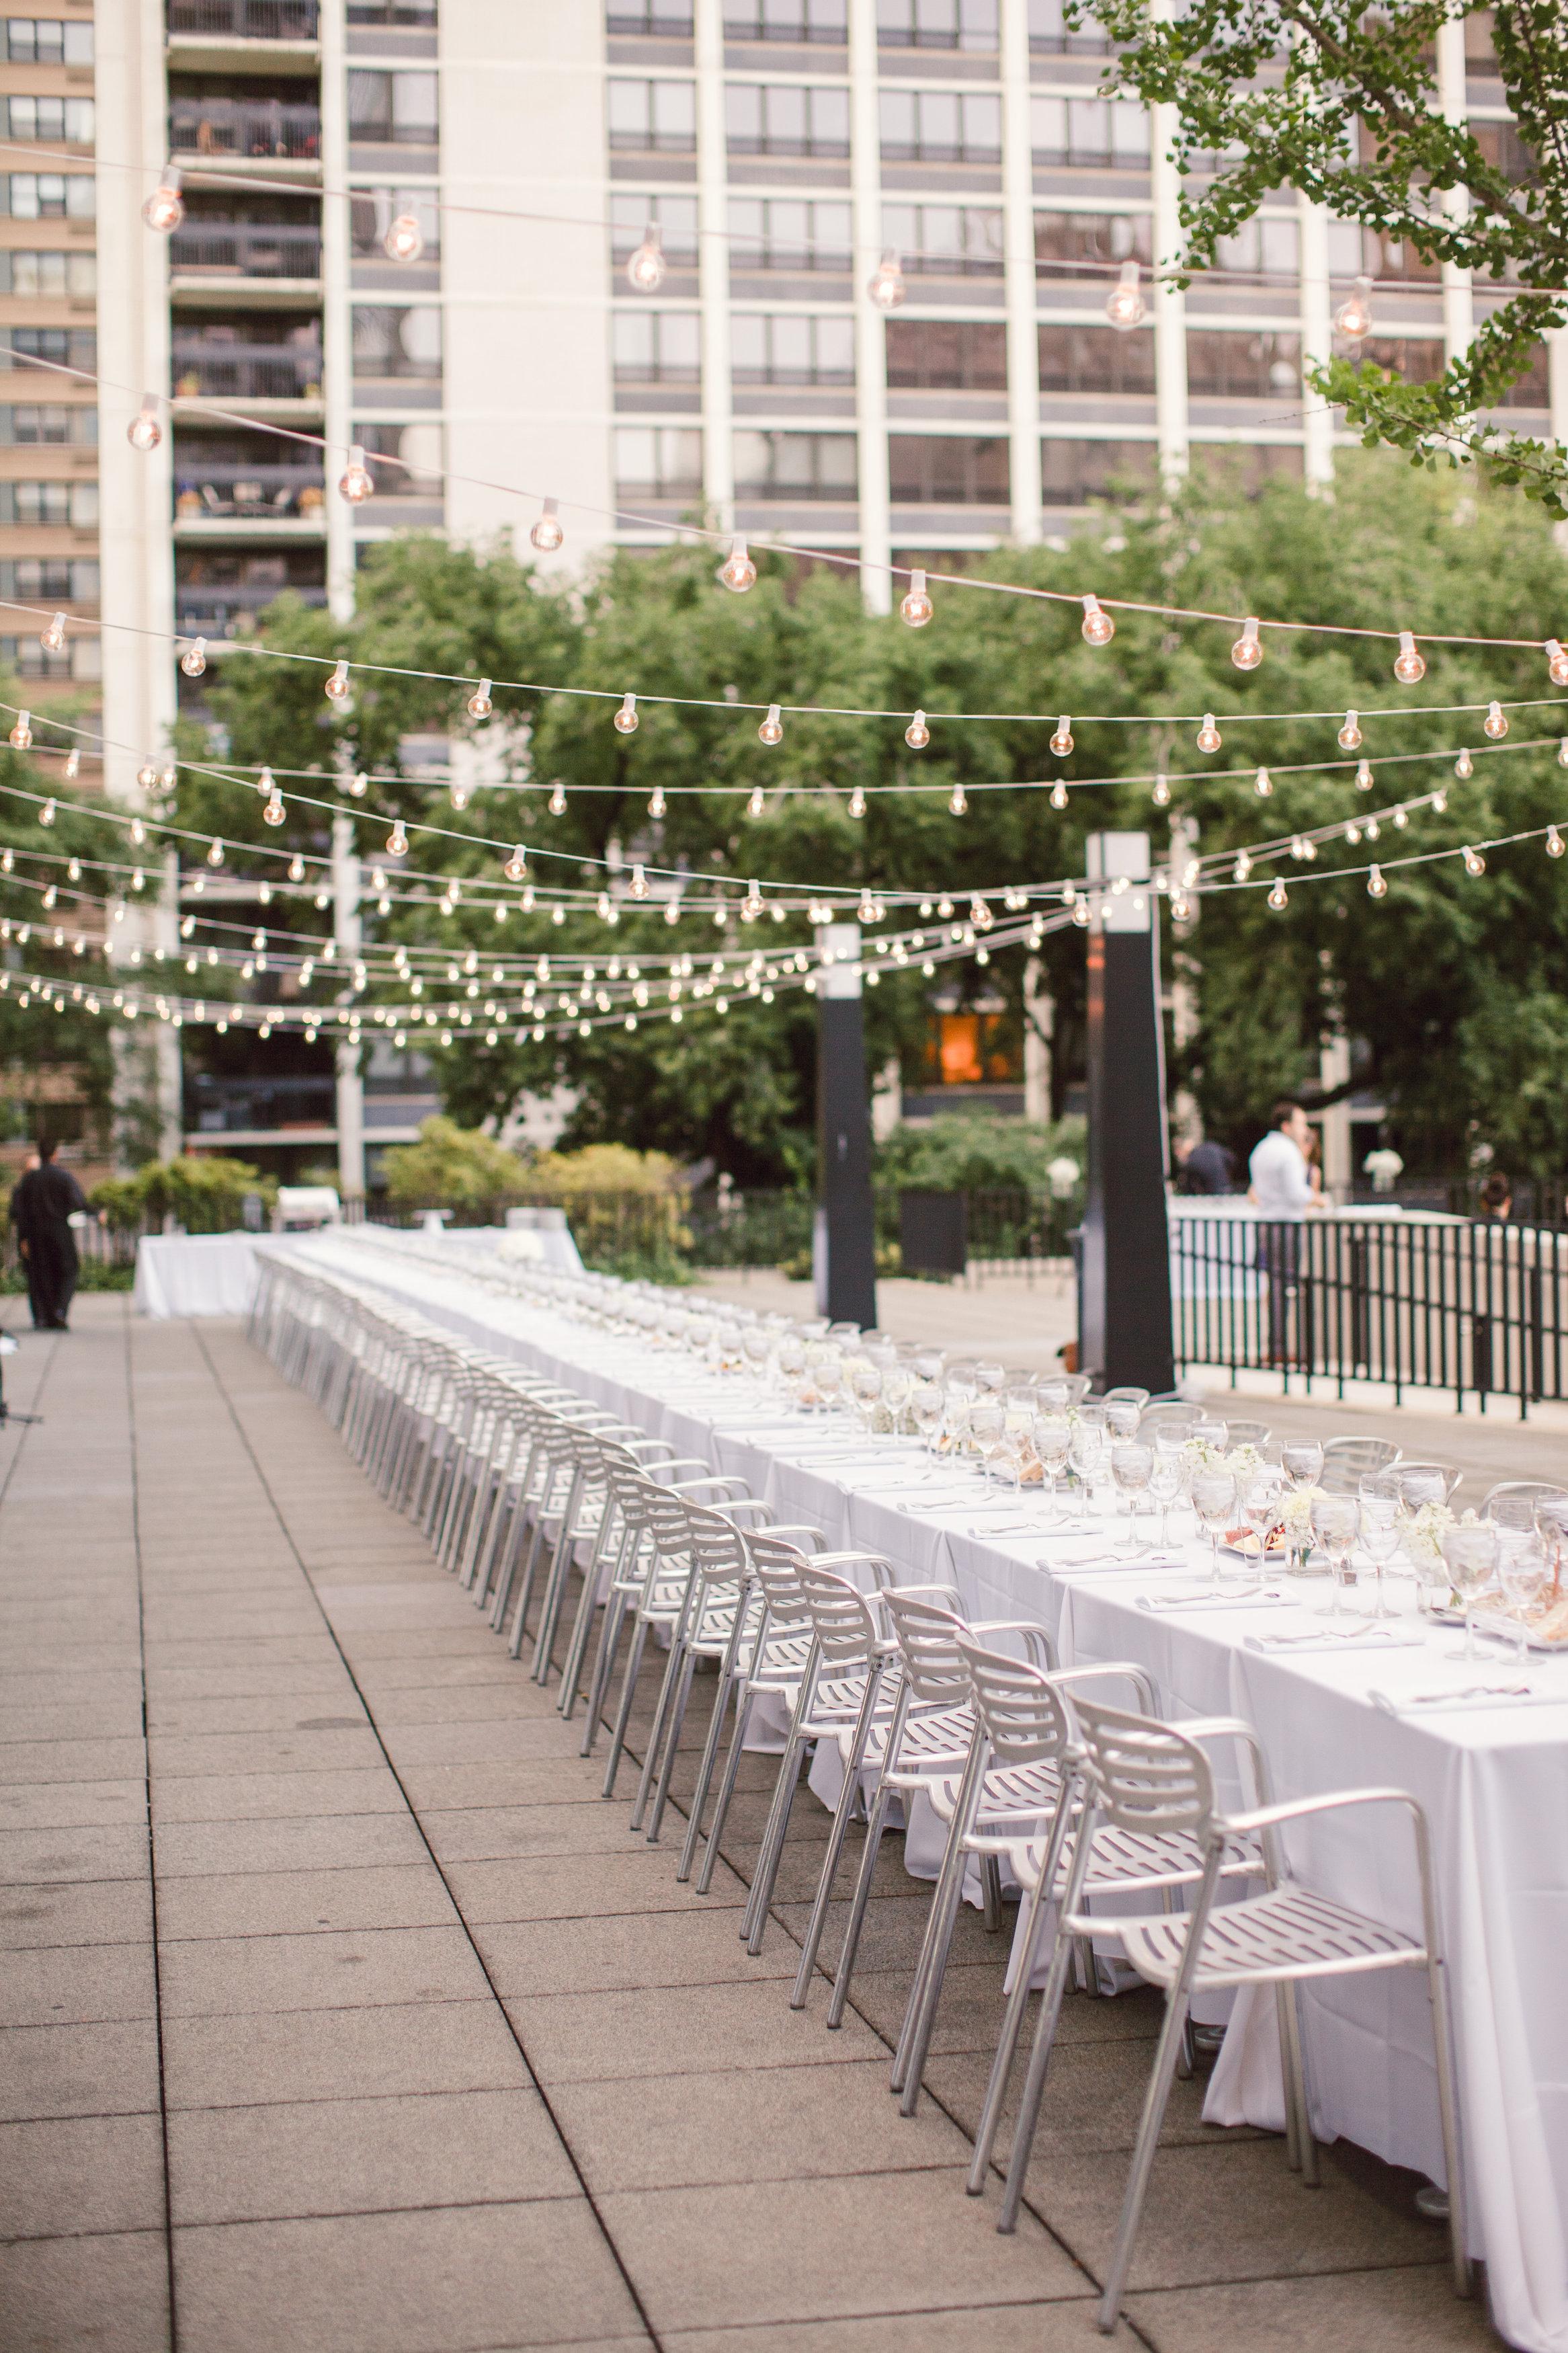 The MCA's terrace is set with a long white banquet table and delicate strands of naked lightbulbs above.